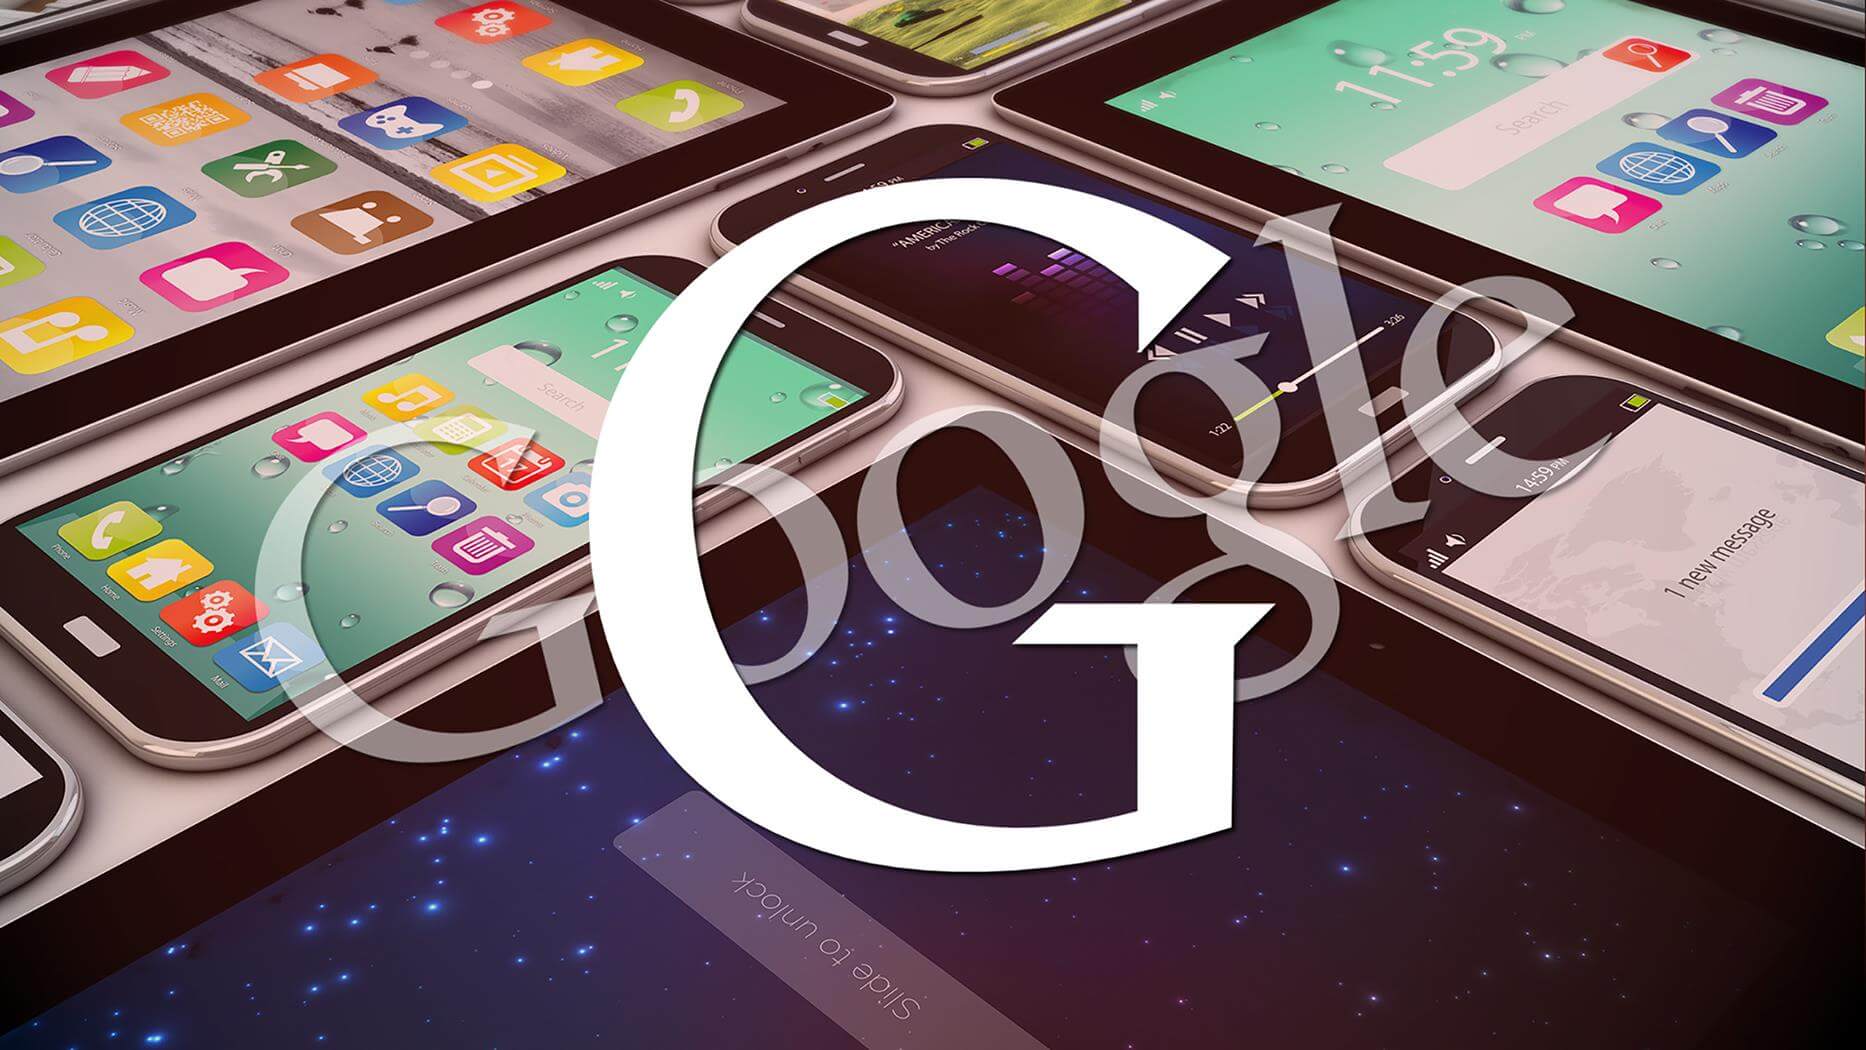 What Every Website Owner Should Know About Google's Mobile-First Indexing